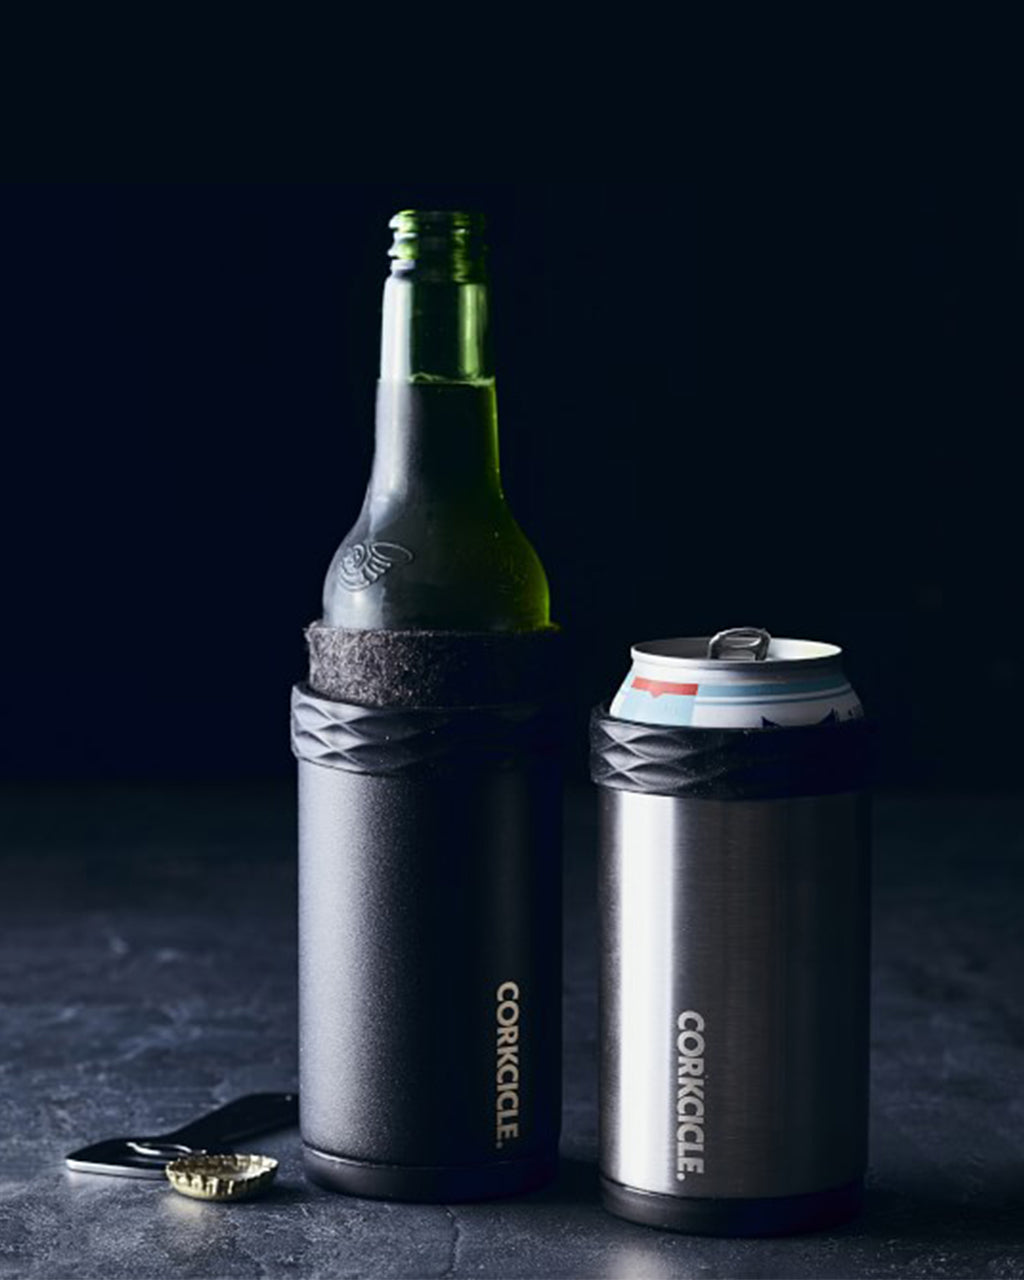 Koozie 4 in 1 Bluetooth Speaker cup 2.1! Holds Skinny cans, 12 and 16 Oz  cans, 12 Oz bottles and is a cup too!!!!